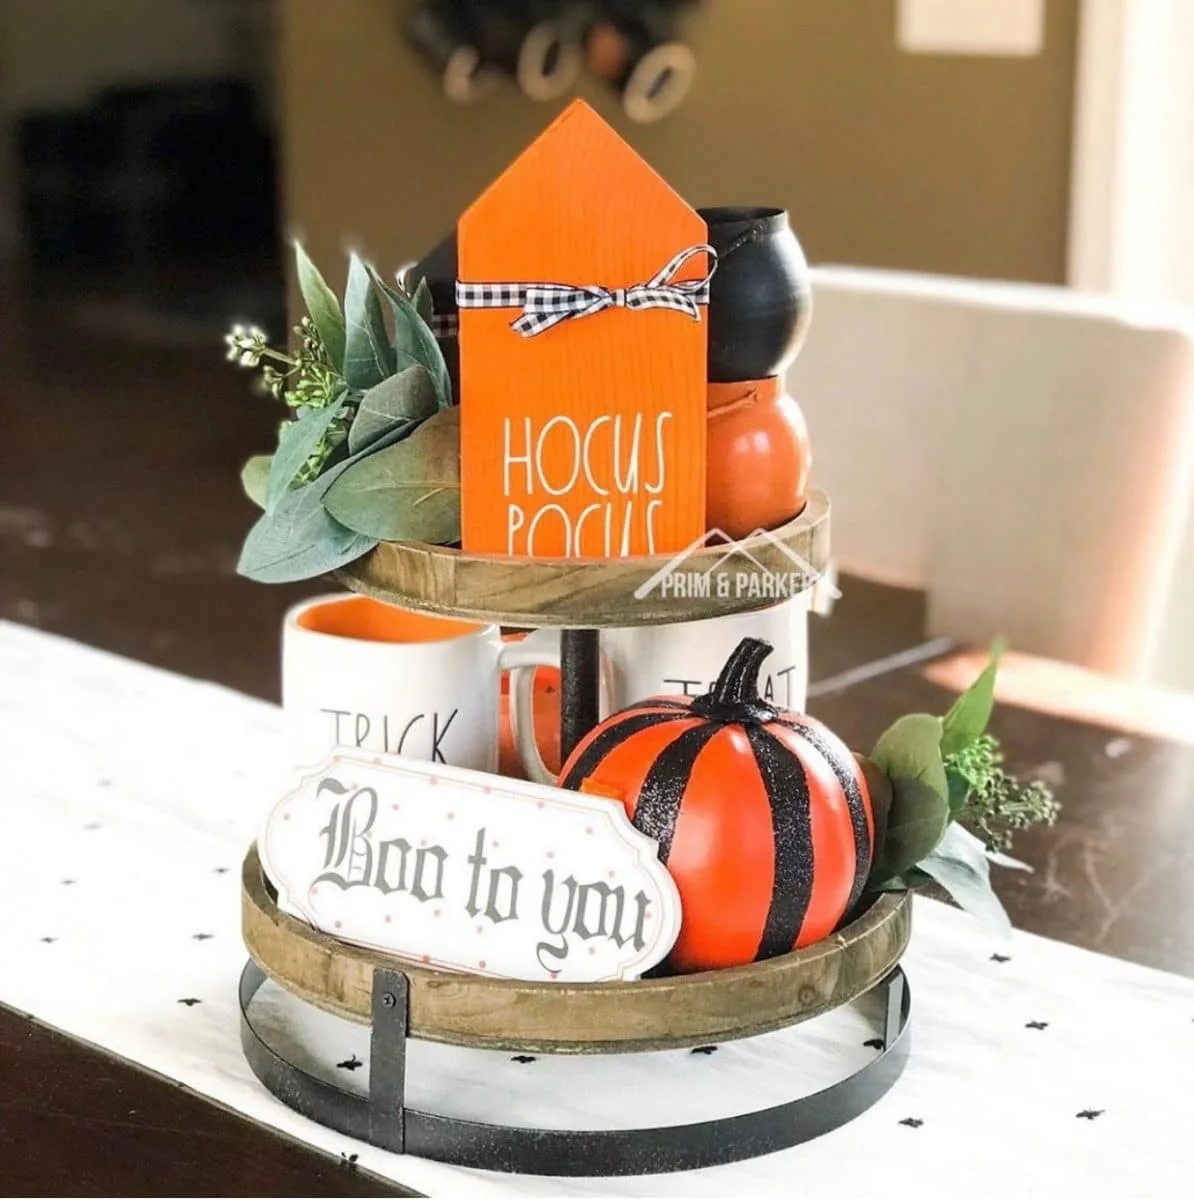 Halloween tiered tray ideas for home.  Orange Hocus Pocus house with black and white gingham ribbon bow, signs, Rae Dunn mug, pumpkin.